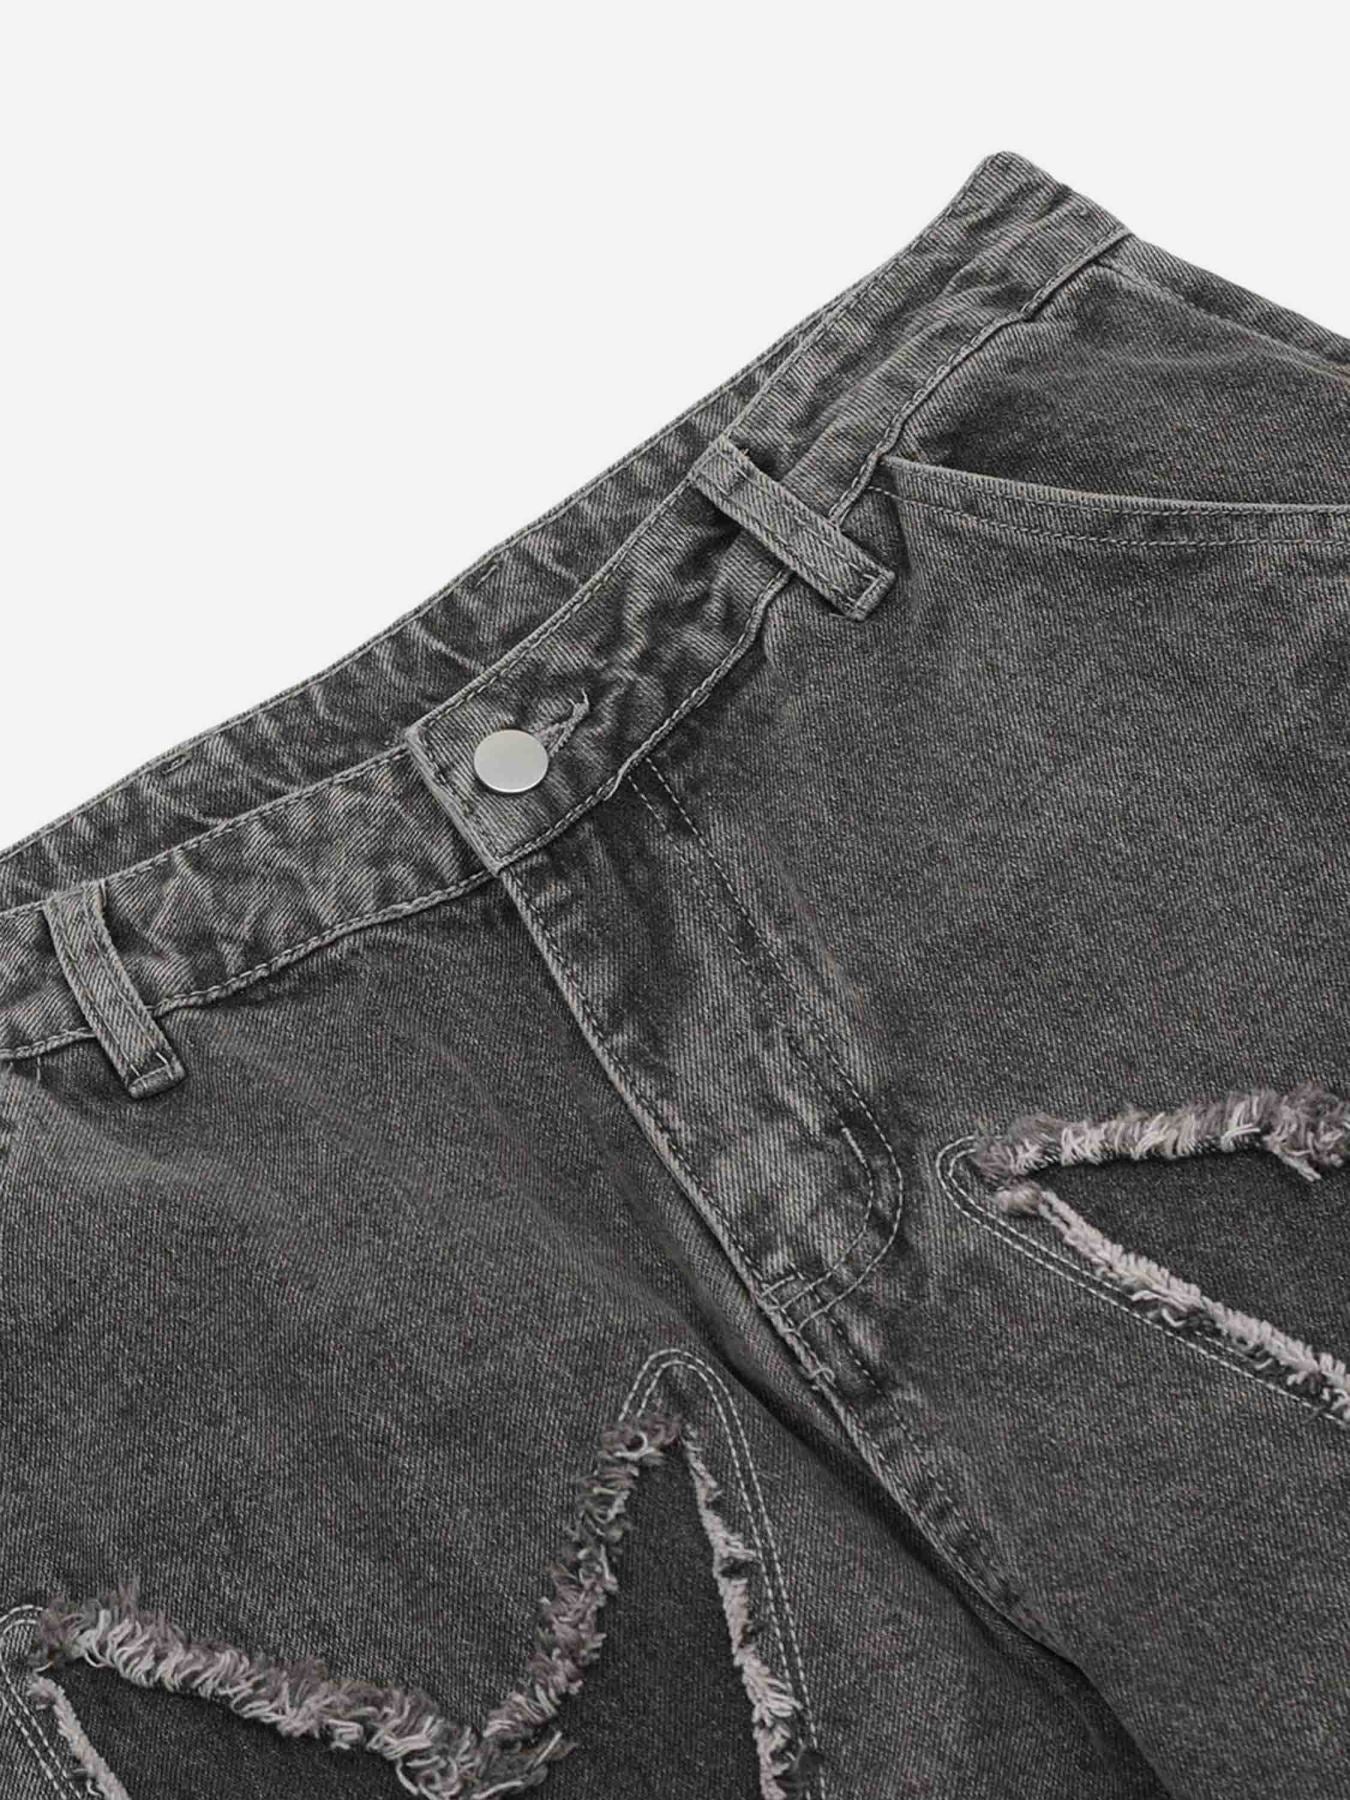 Thesupermade American Applique Star Embroidered Jeans